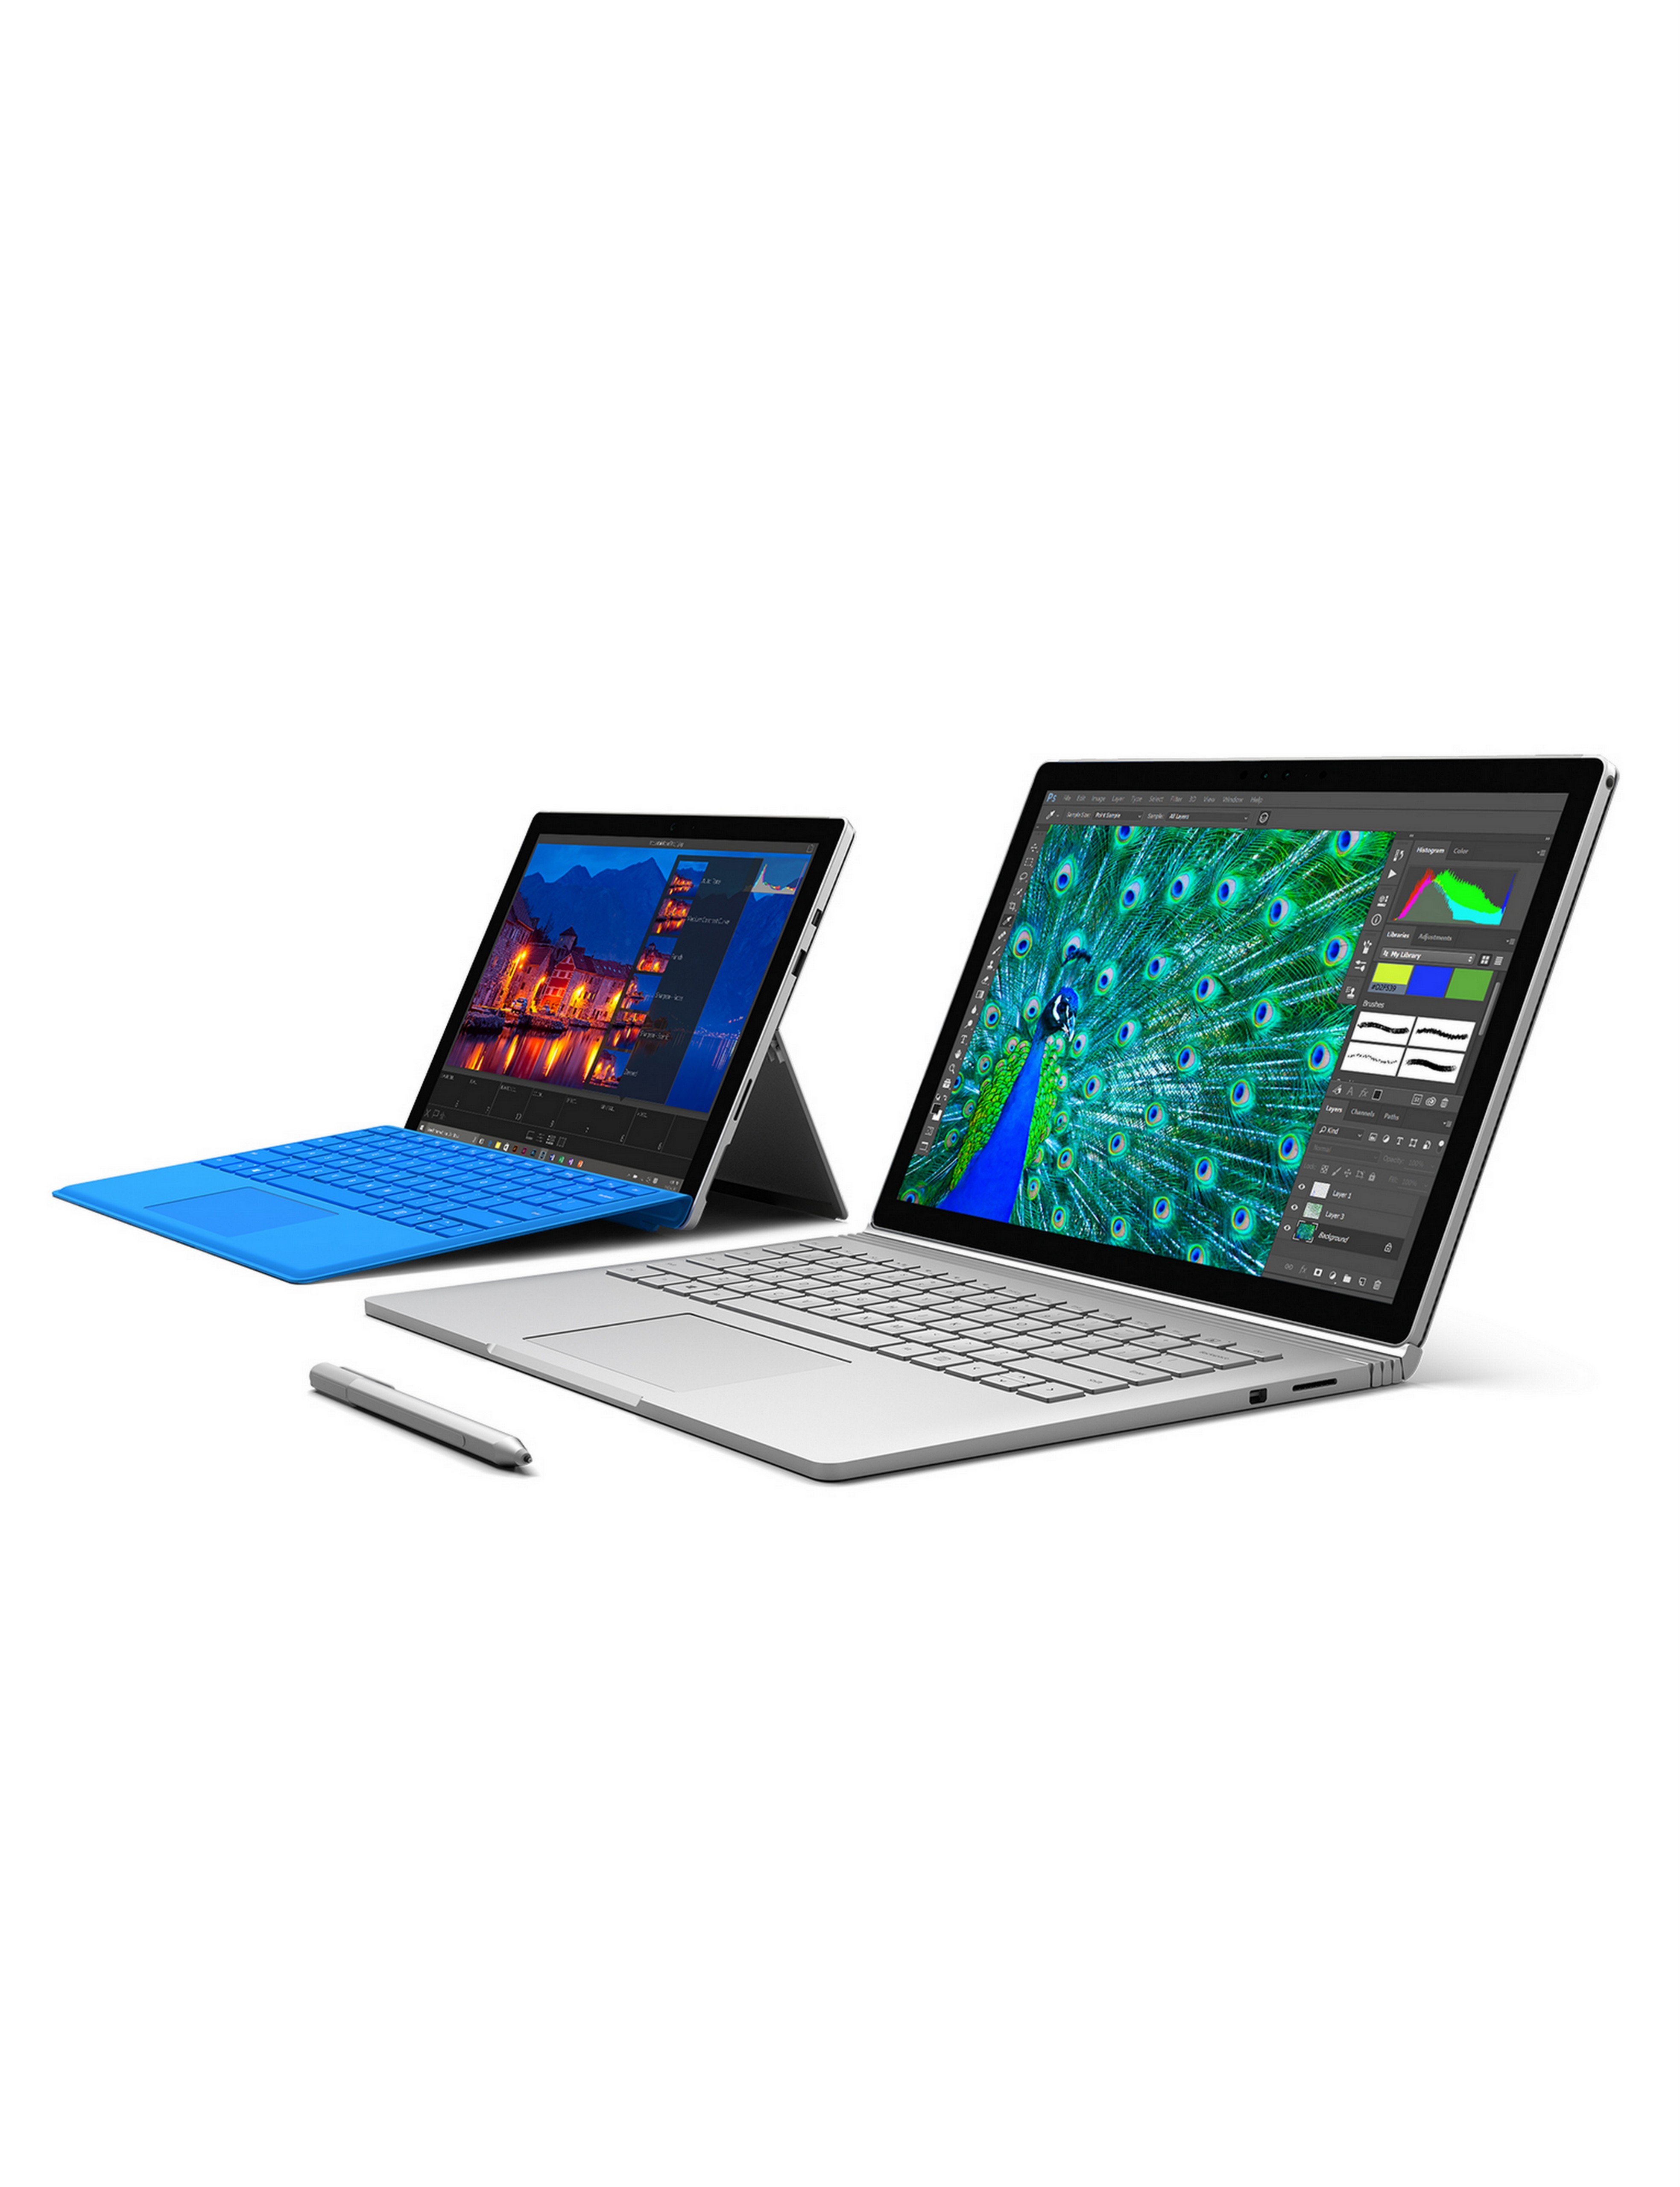 On Sale Today 1tb Core I7 Surface Book And Surface Pro 4 And New